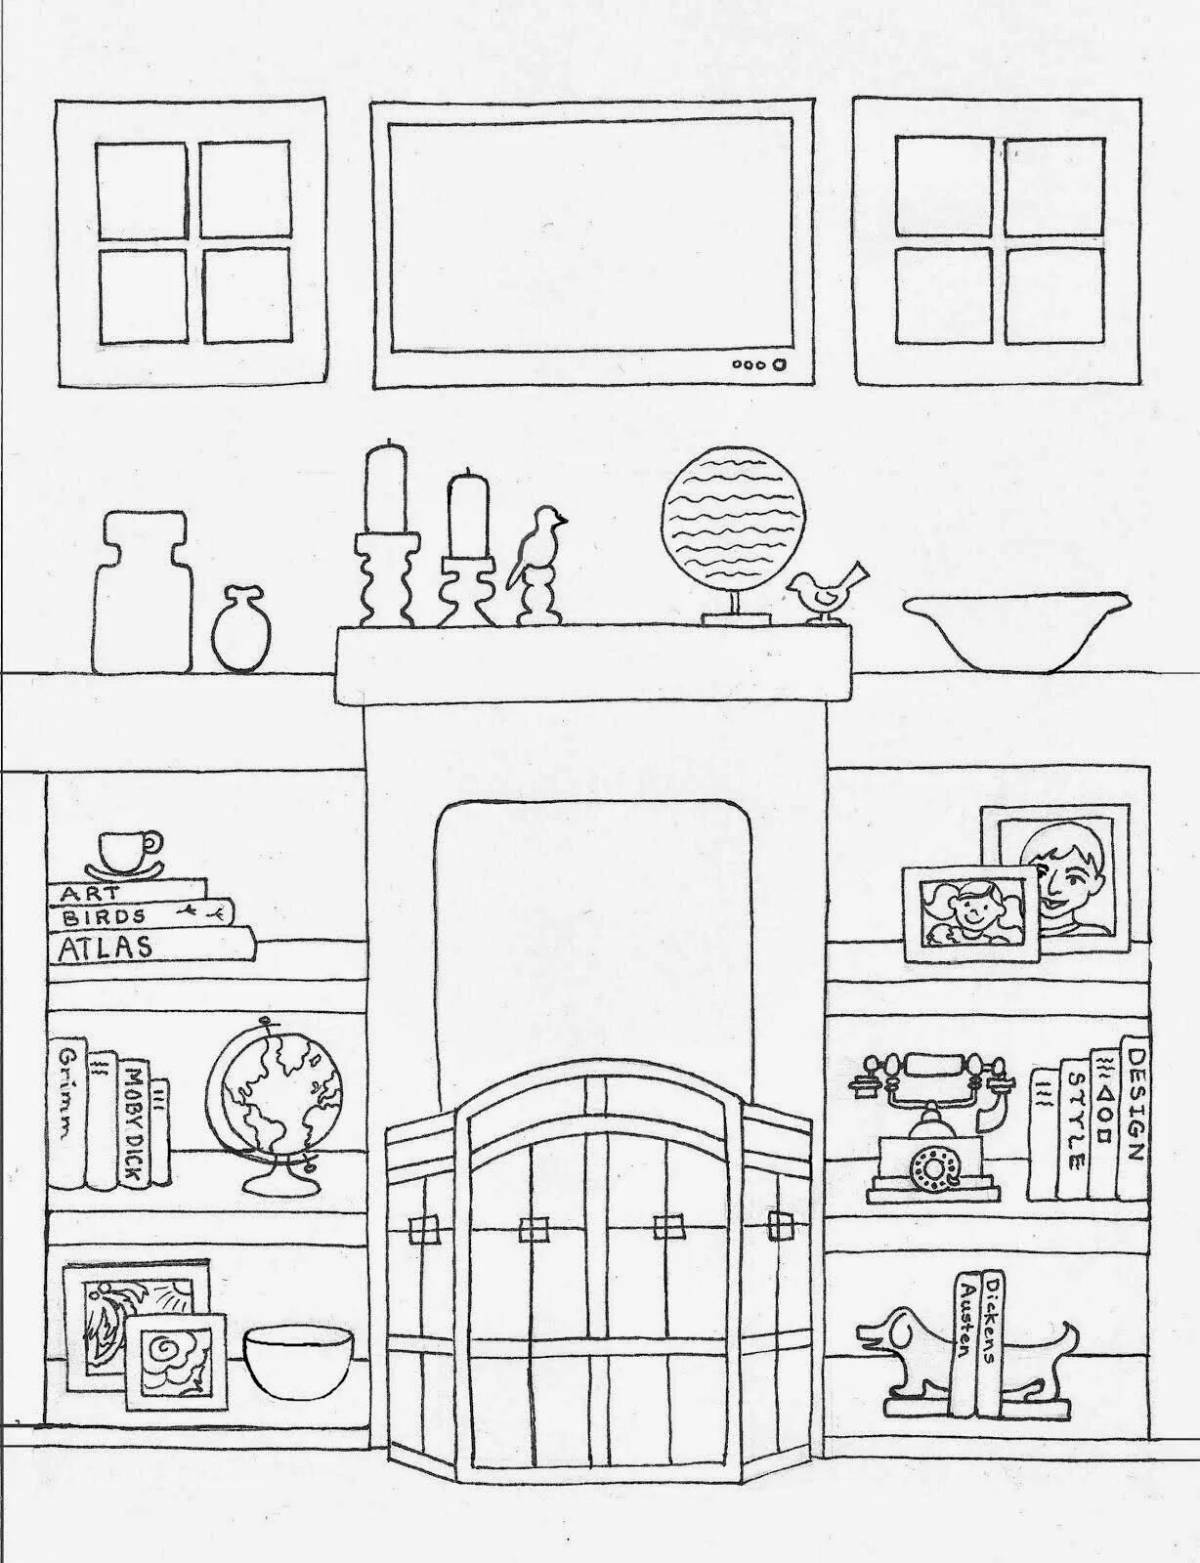 Coloring page elegant doll house